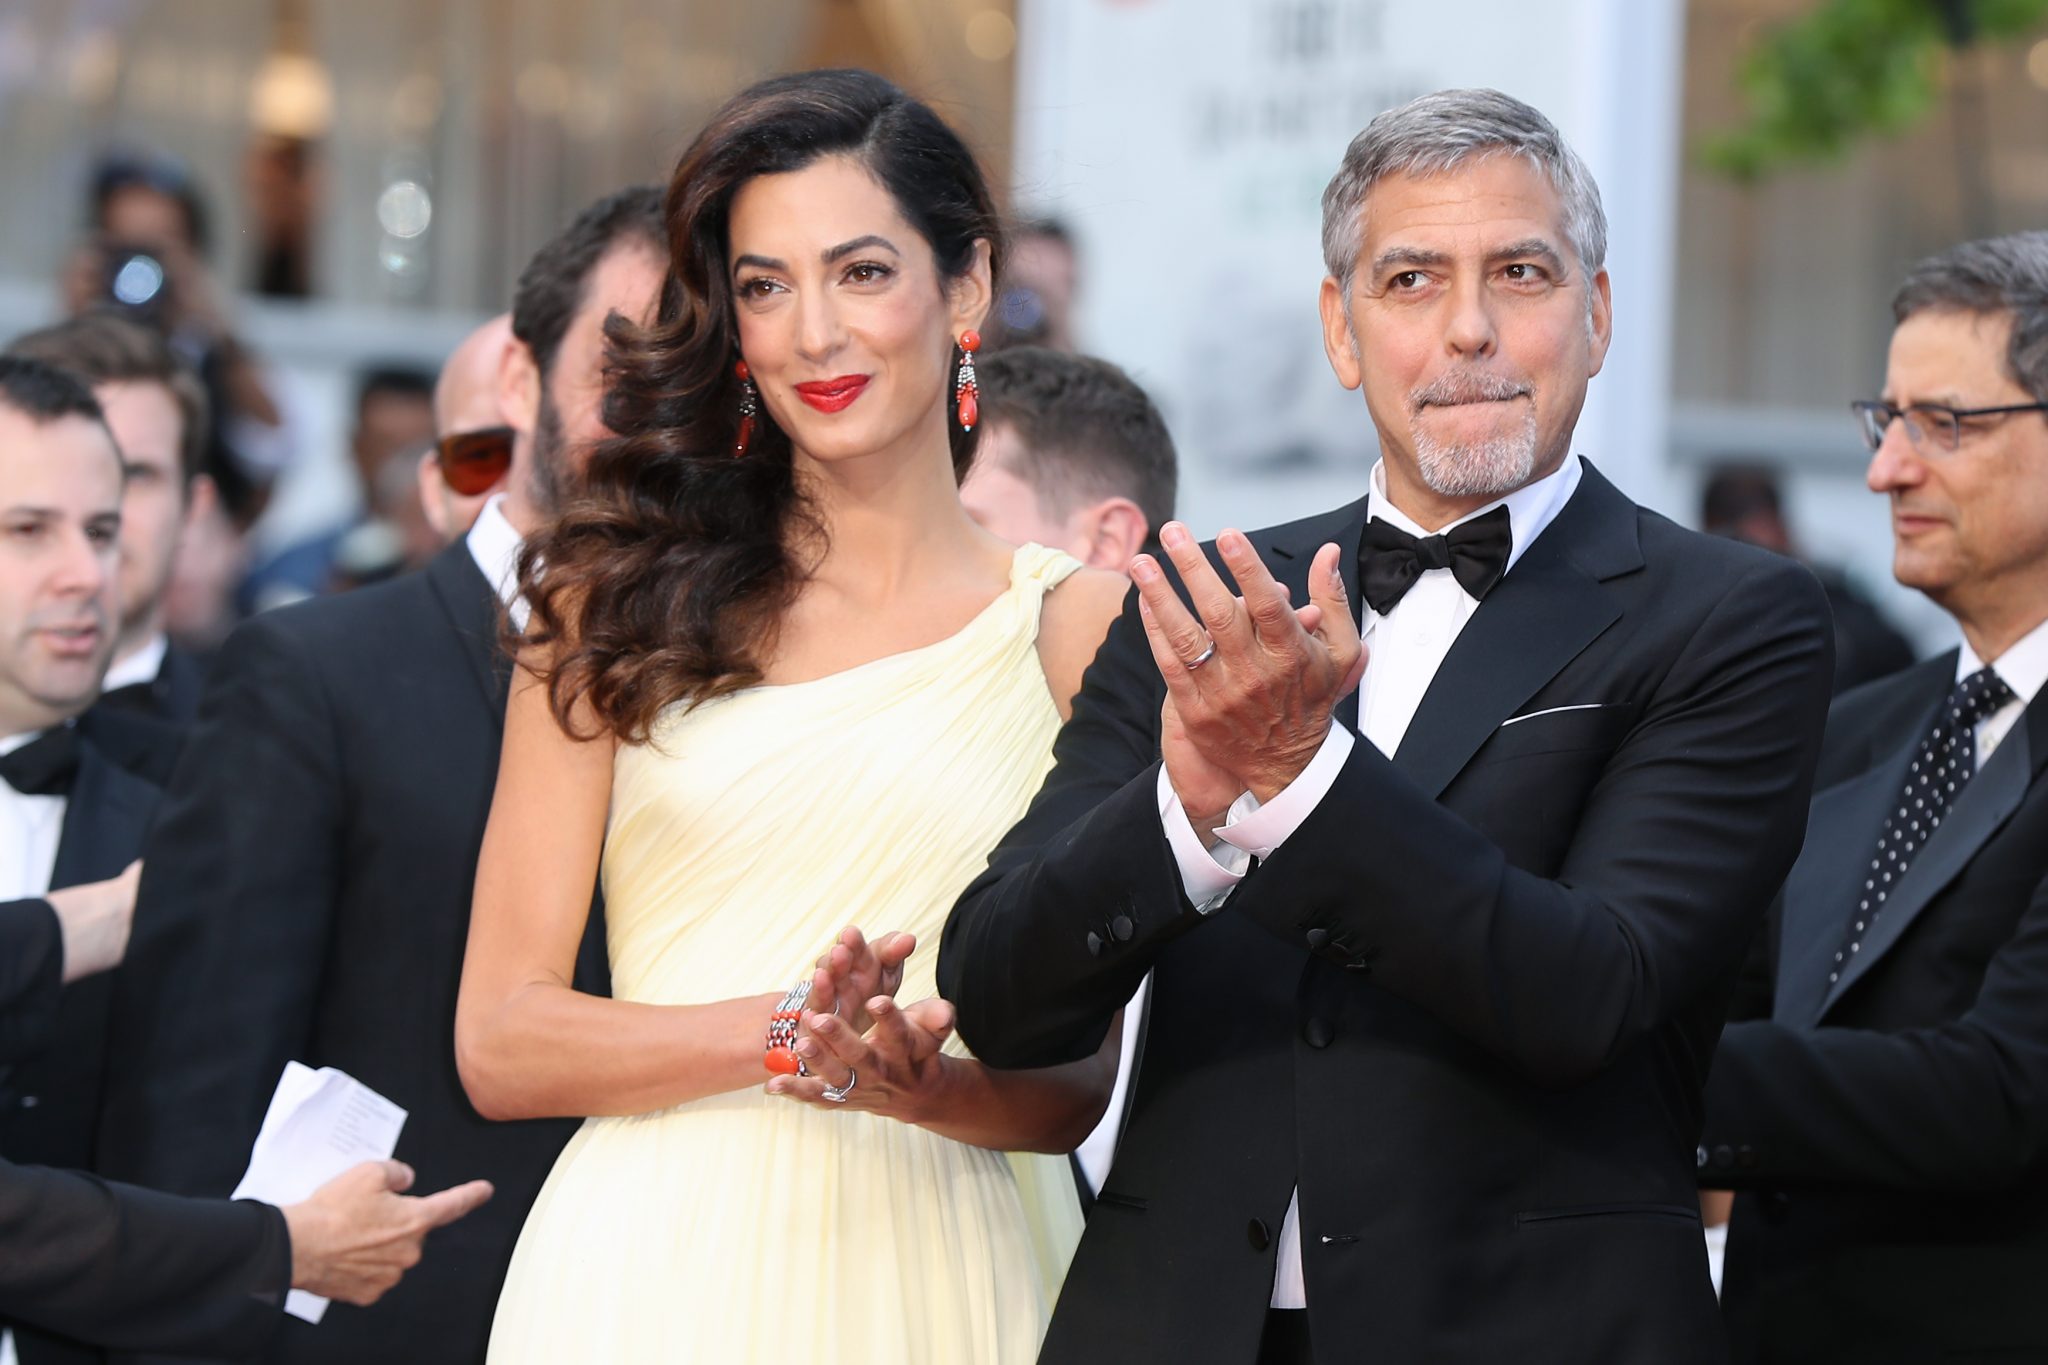 (FILES) This file photo taken on May 12, 2016 shows US actor George Clooney (R)and  his wife British-Lebanese lawyer Amal Clooney arriving for the screening of the film "Money Monster" at the 69th Cannes Film Festival in Cannes, southern France. Amal Clooney, the prominent Lebanese-British human rights lawyer and wife of American actor George, is pregnant with twins, a family friend said on February 8, 2017. "She's pregnant with twins," the friend said, asking to remain anonymous and without providing any further details about the sexes of the babies or due date.The 39-year-old rights lawyer and 55-year-old Hollywood star tied the knot in Venice in 2014.  / AFP PHOTO / Valery HACHE